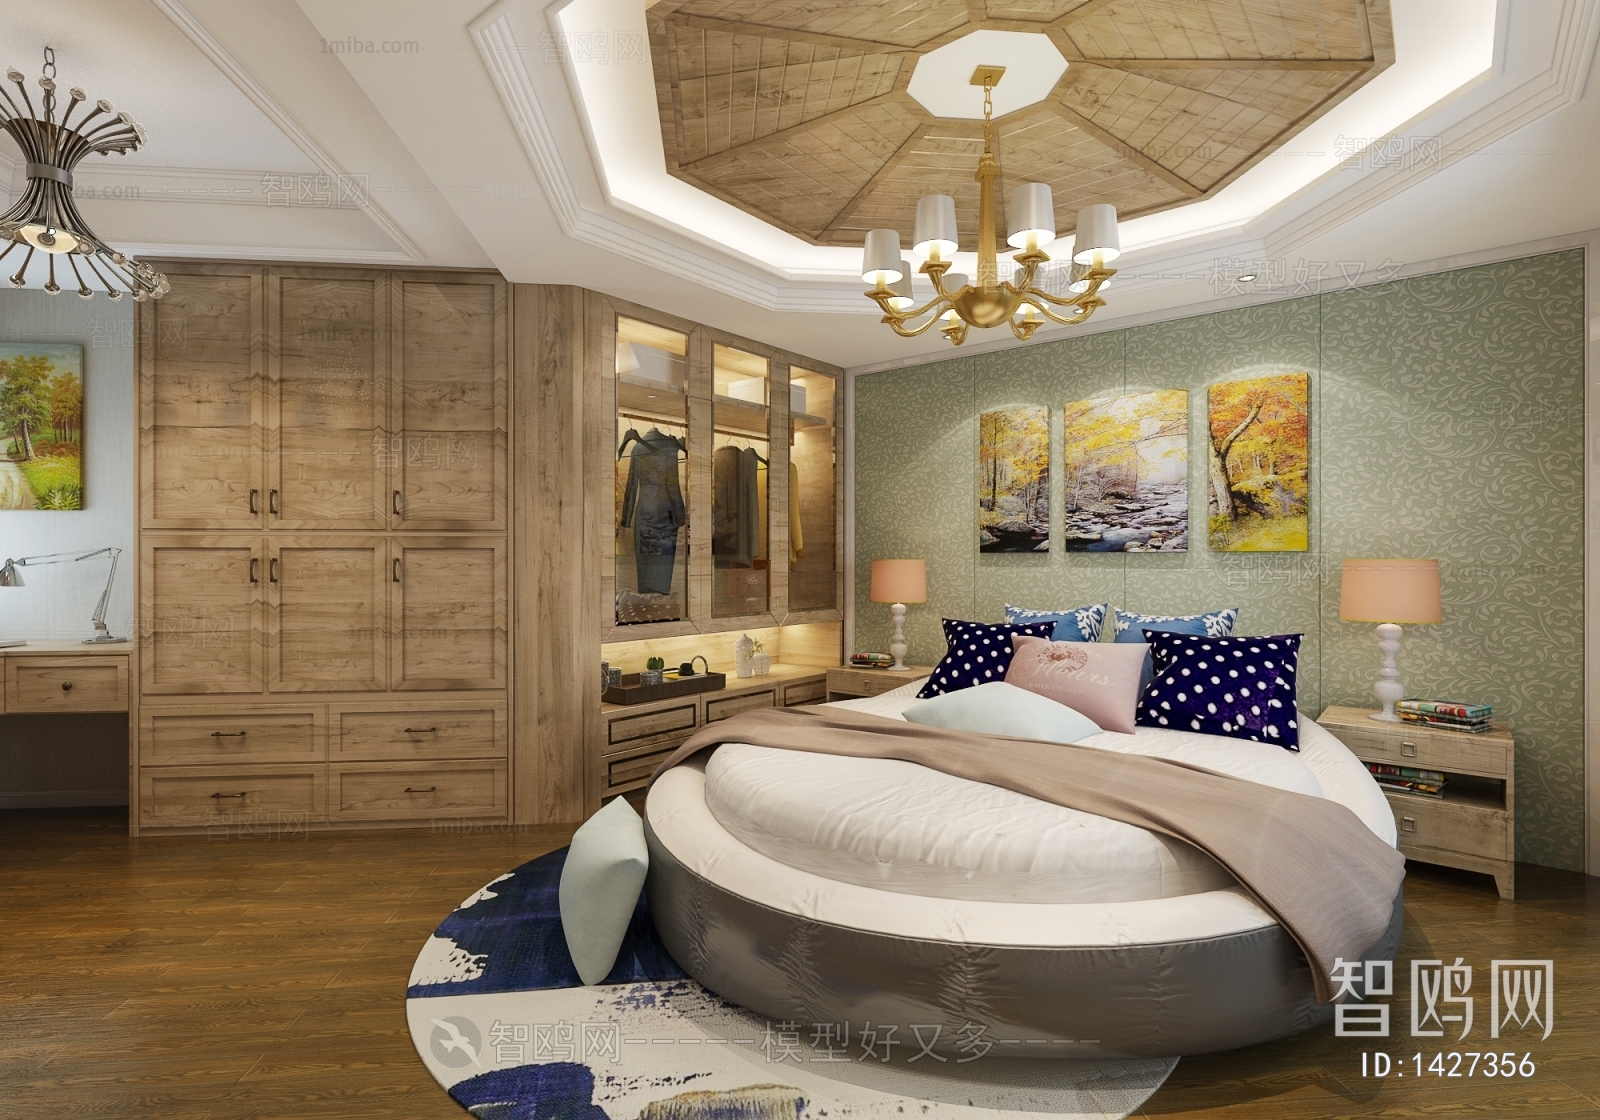 Modern Mix And Match Styles Bedroom